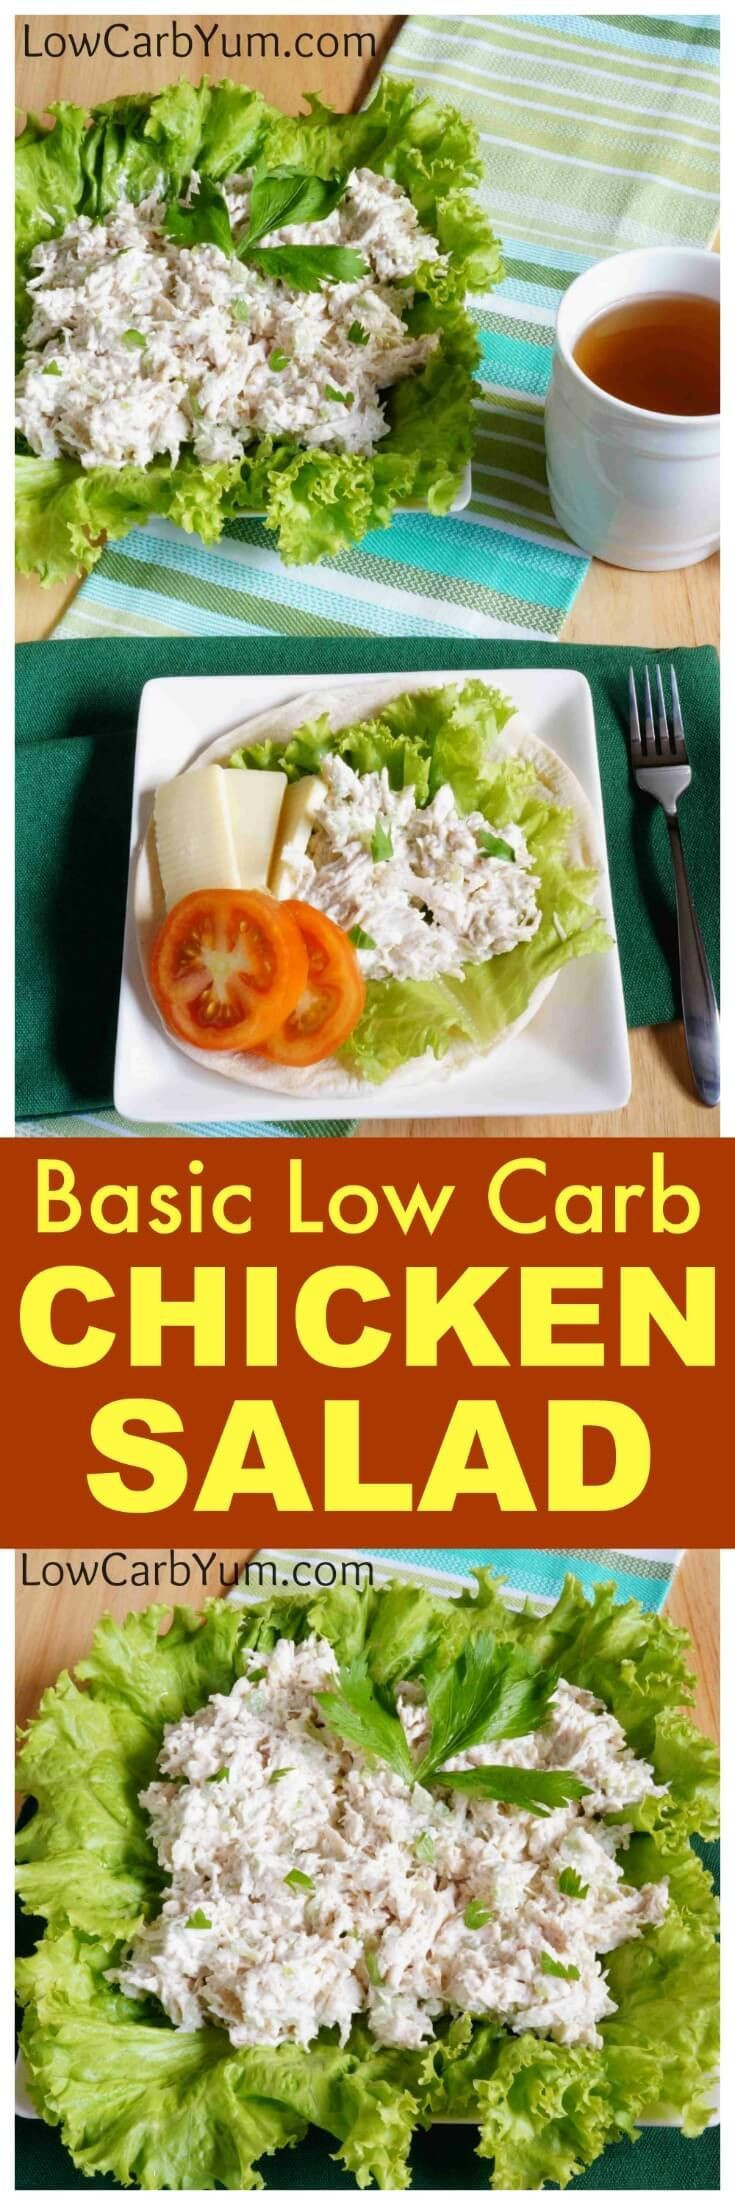 Canned Chicken Recipes Low Carb
 100 Chicken salad recipes on Pinterest